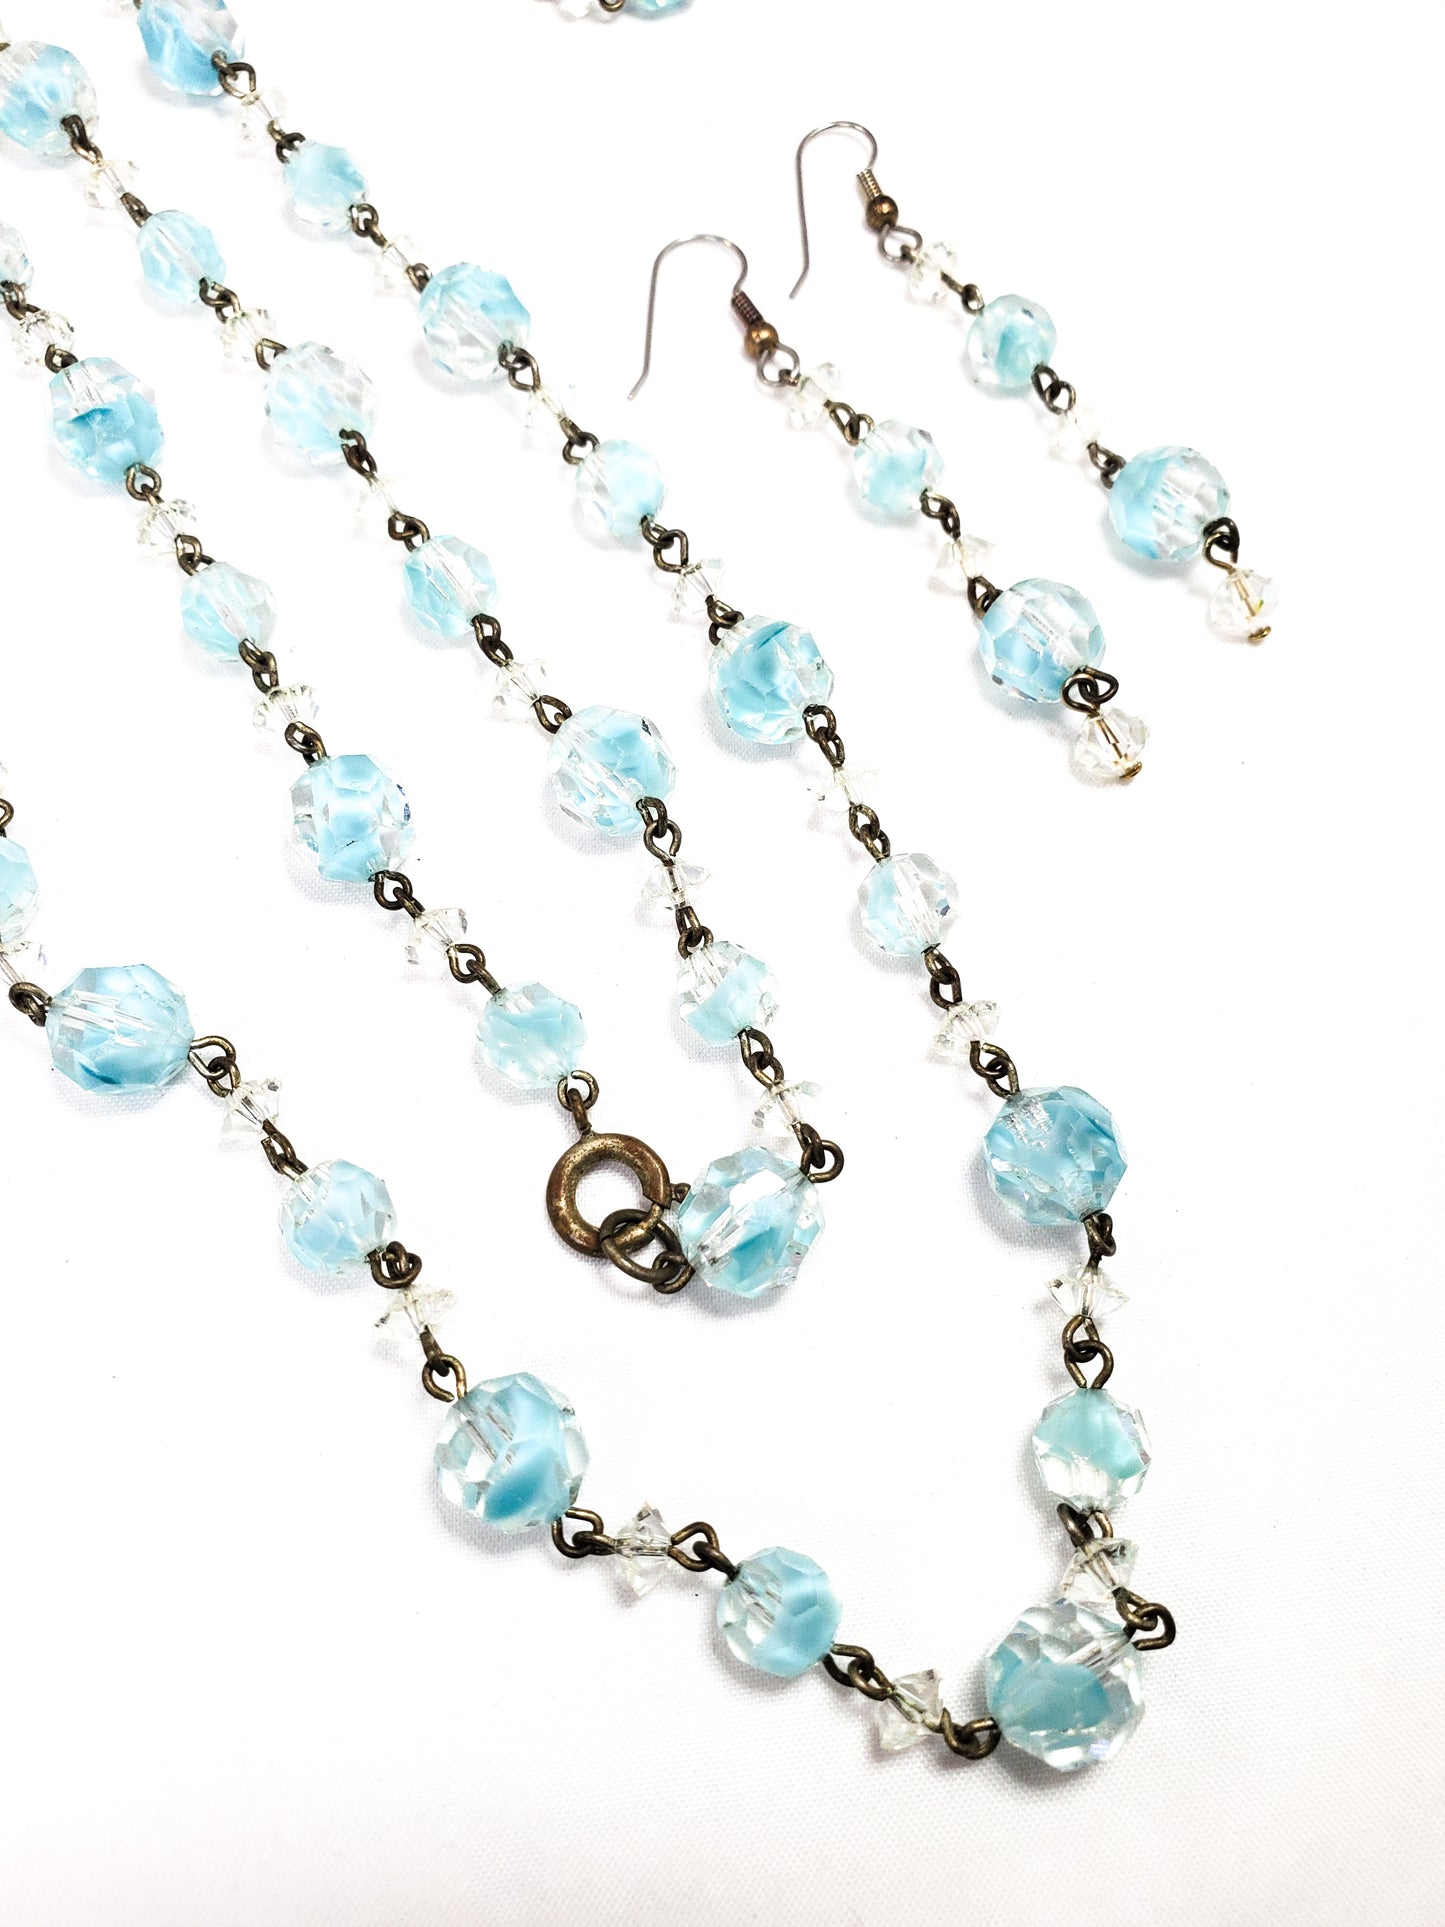 Antique blue and clear bi-colored lead glass faceted beads on brass chain demi parure set